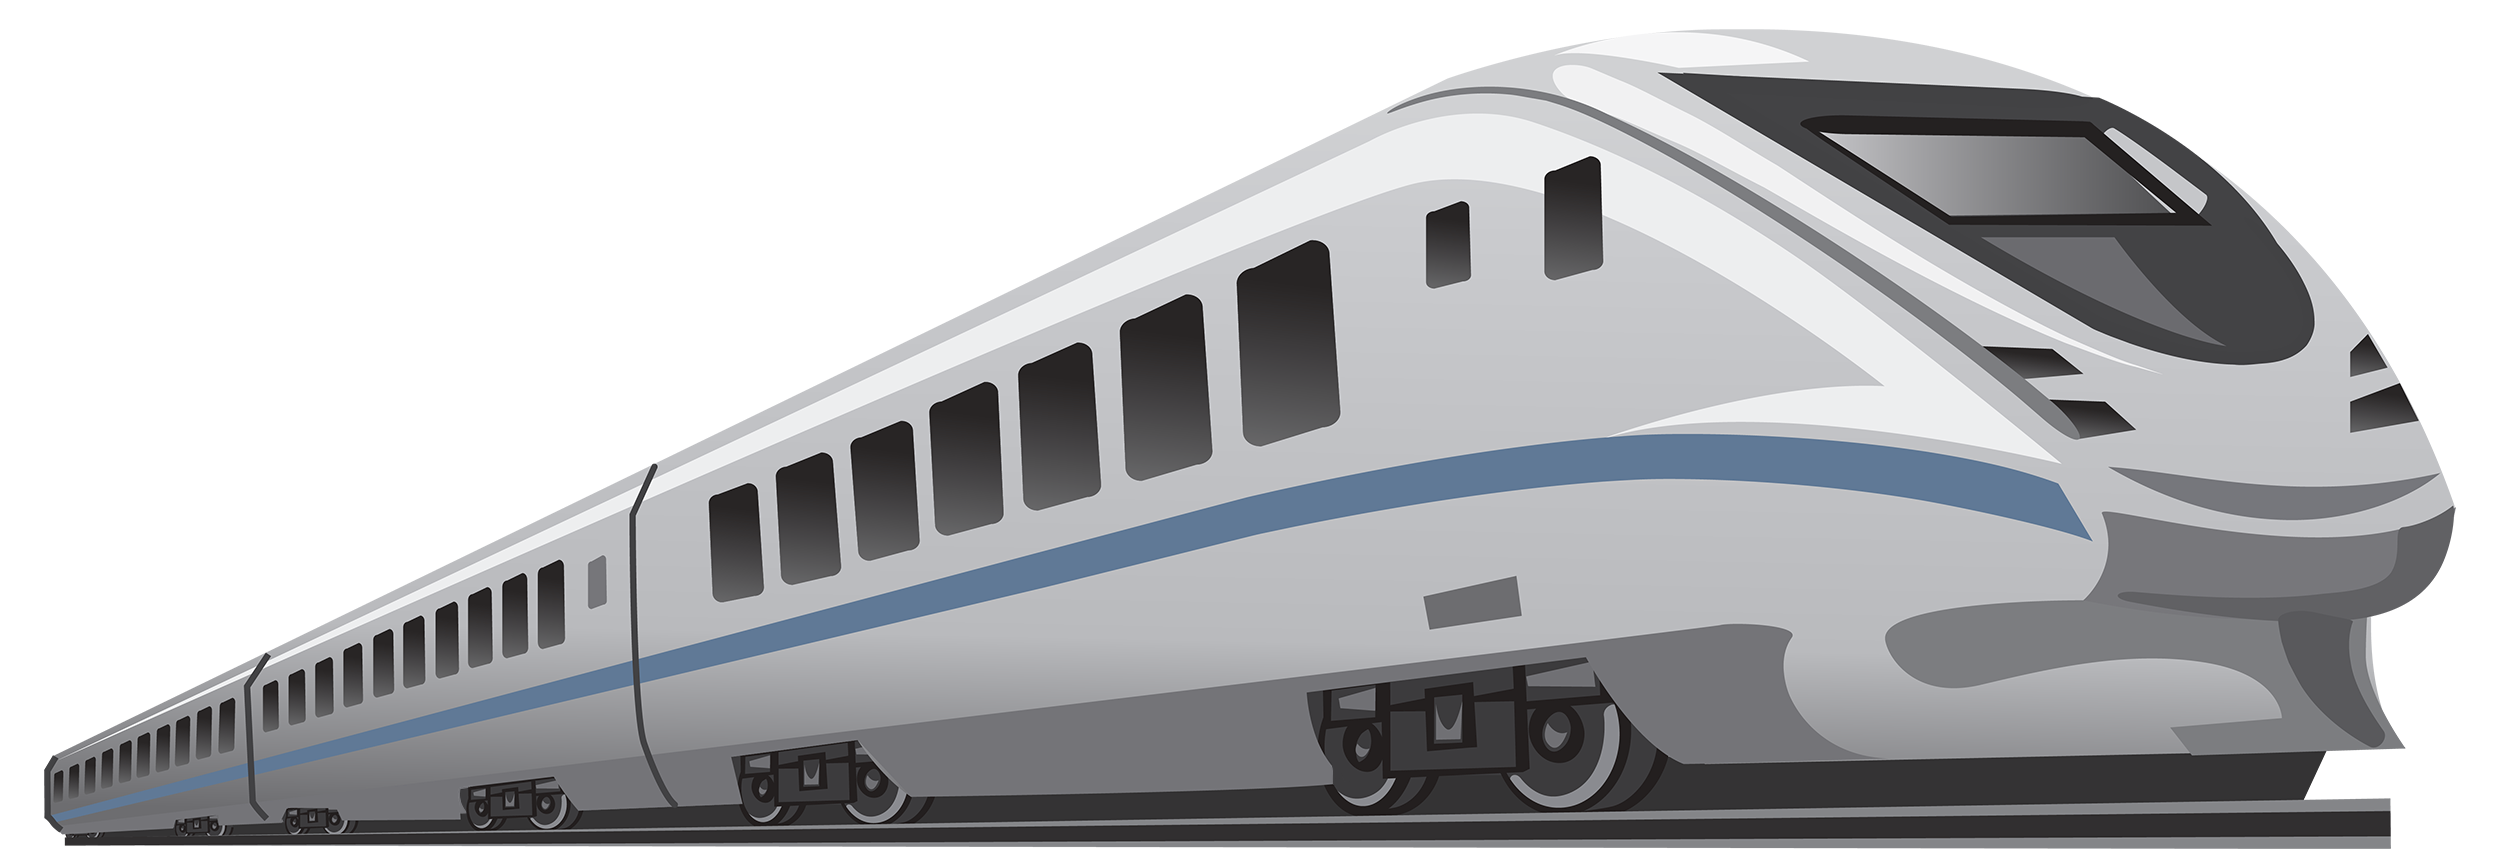 train clipart png - photo #5